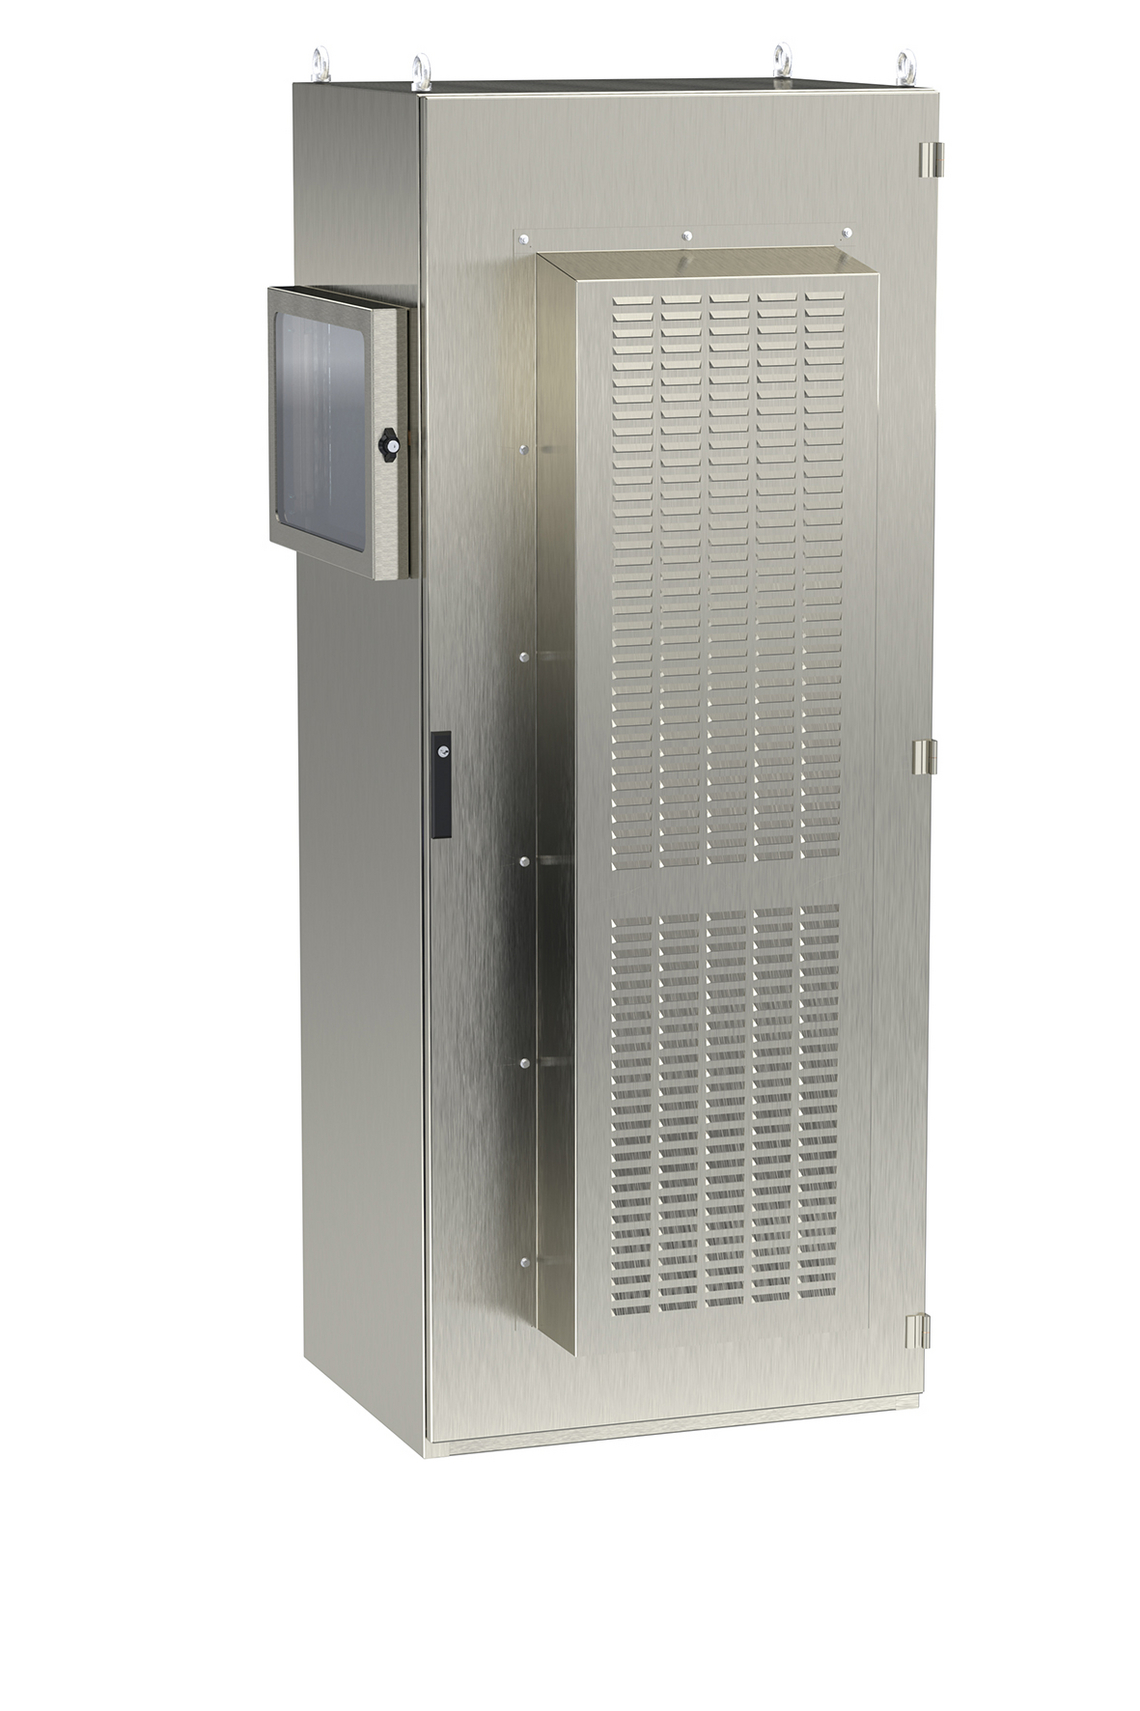 Stainless steel cabinet V4A with cooling unit